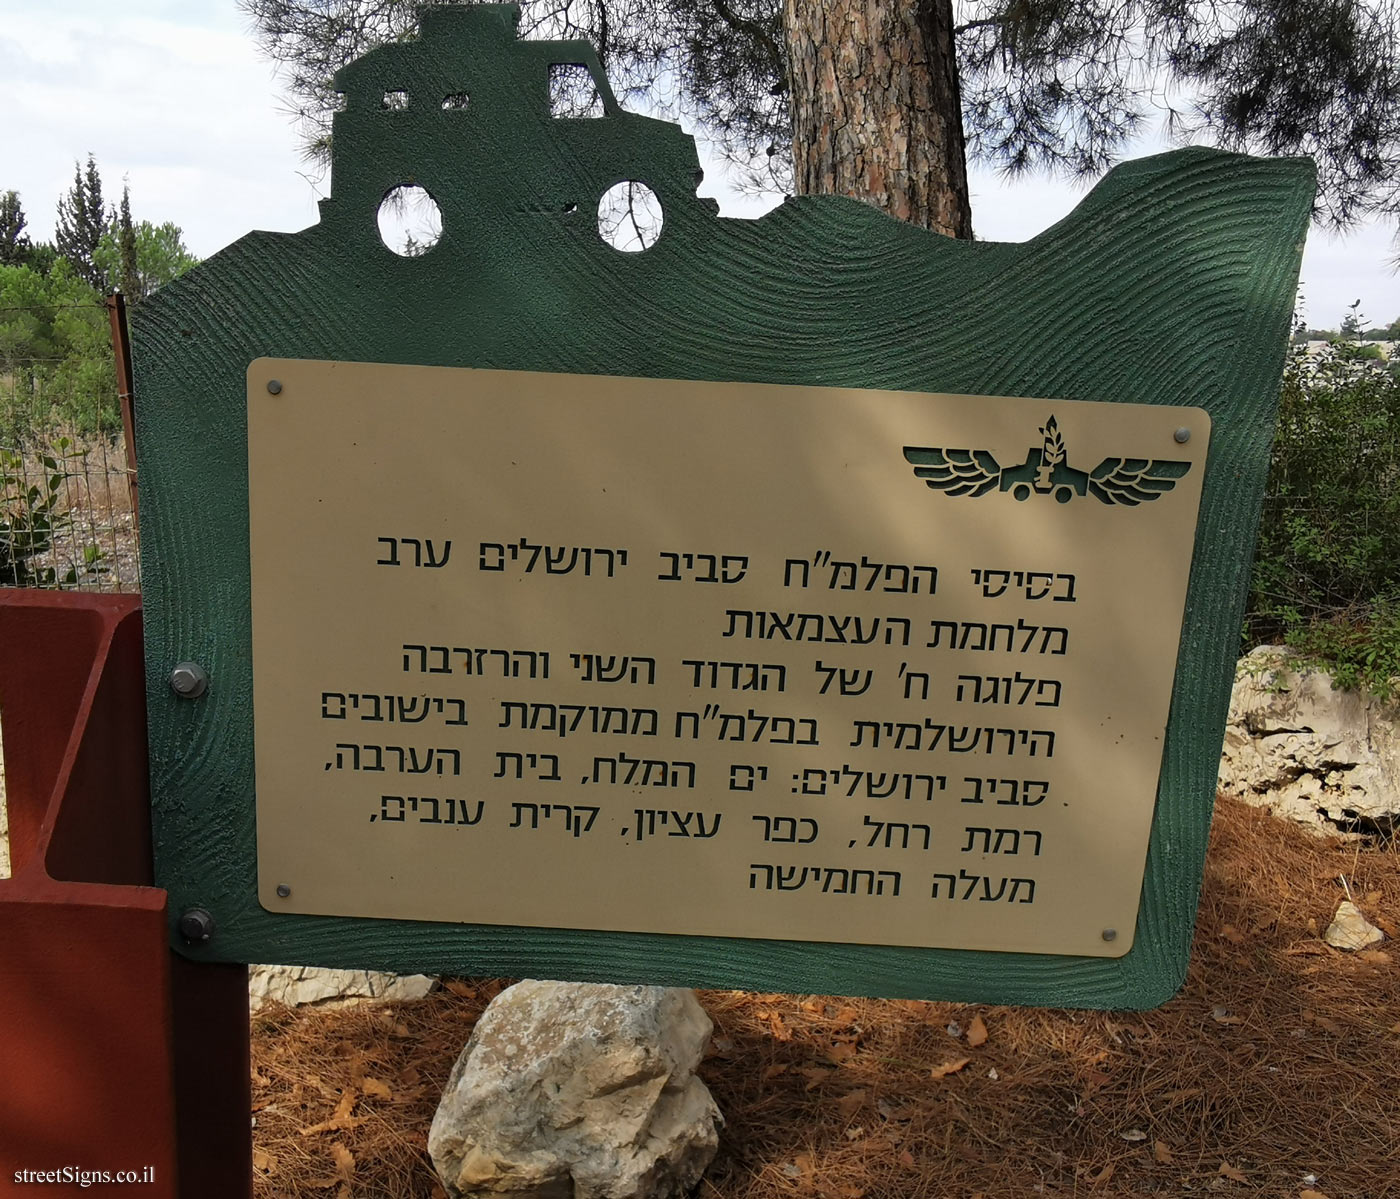 Palmach bases around Jerusalem - In memory of the 6th battalion of the Palmach-Harel Brigade